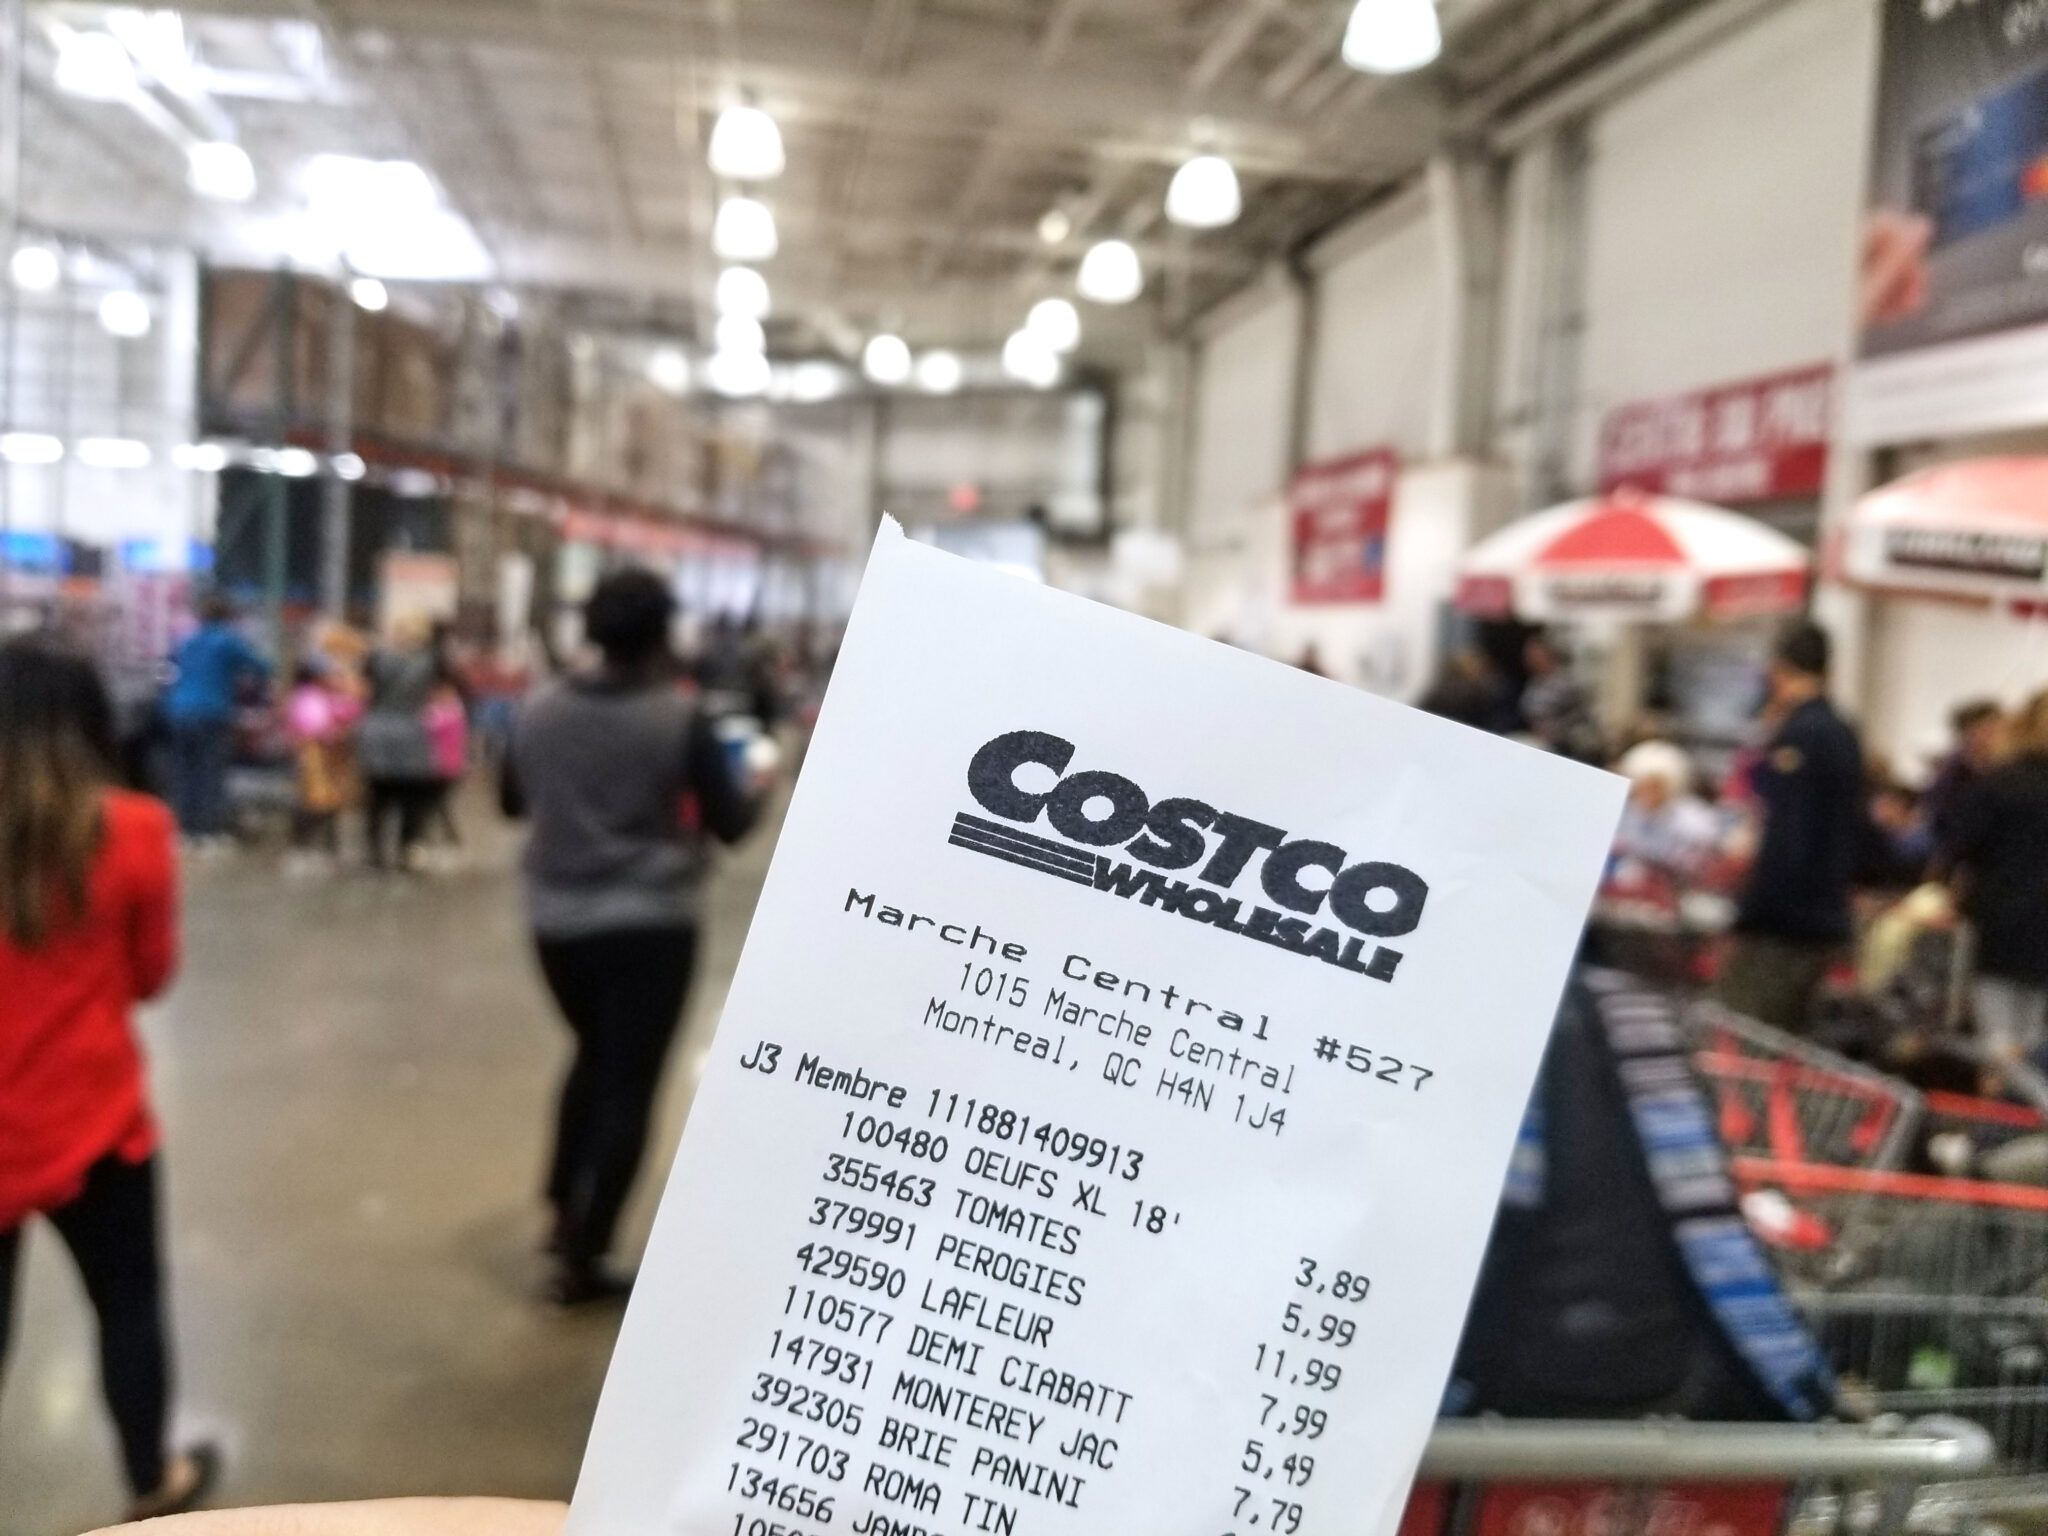 Is Costco Open on Christmas Day 2021?